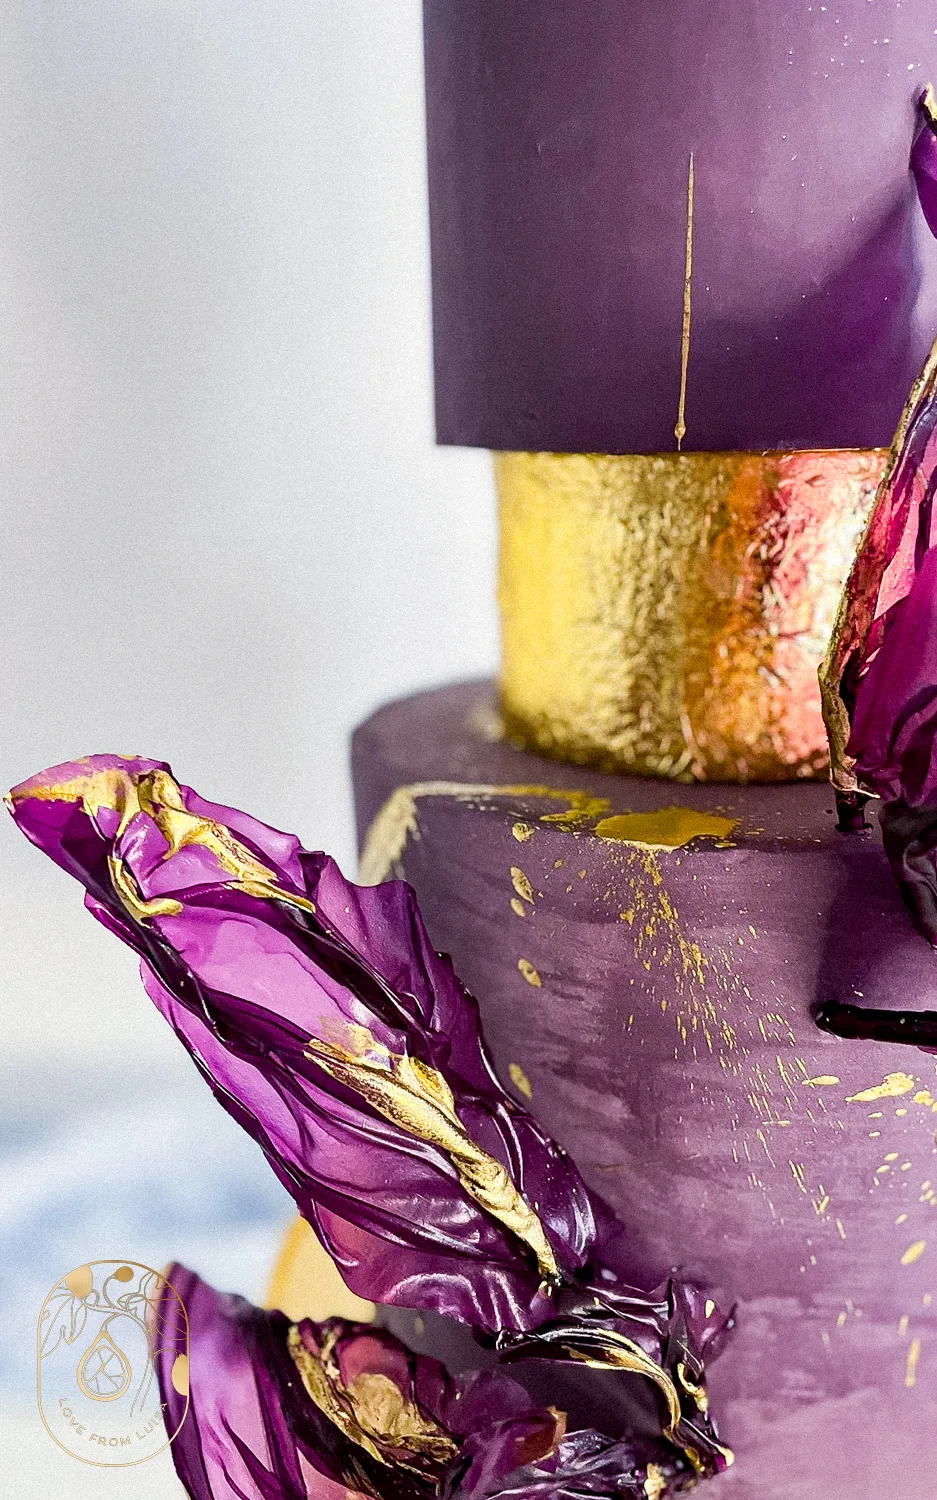 Purple and Gold Wedding Cake Shot from close up with purple details and gold tier